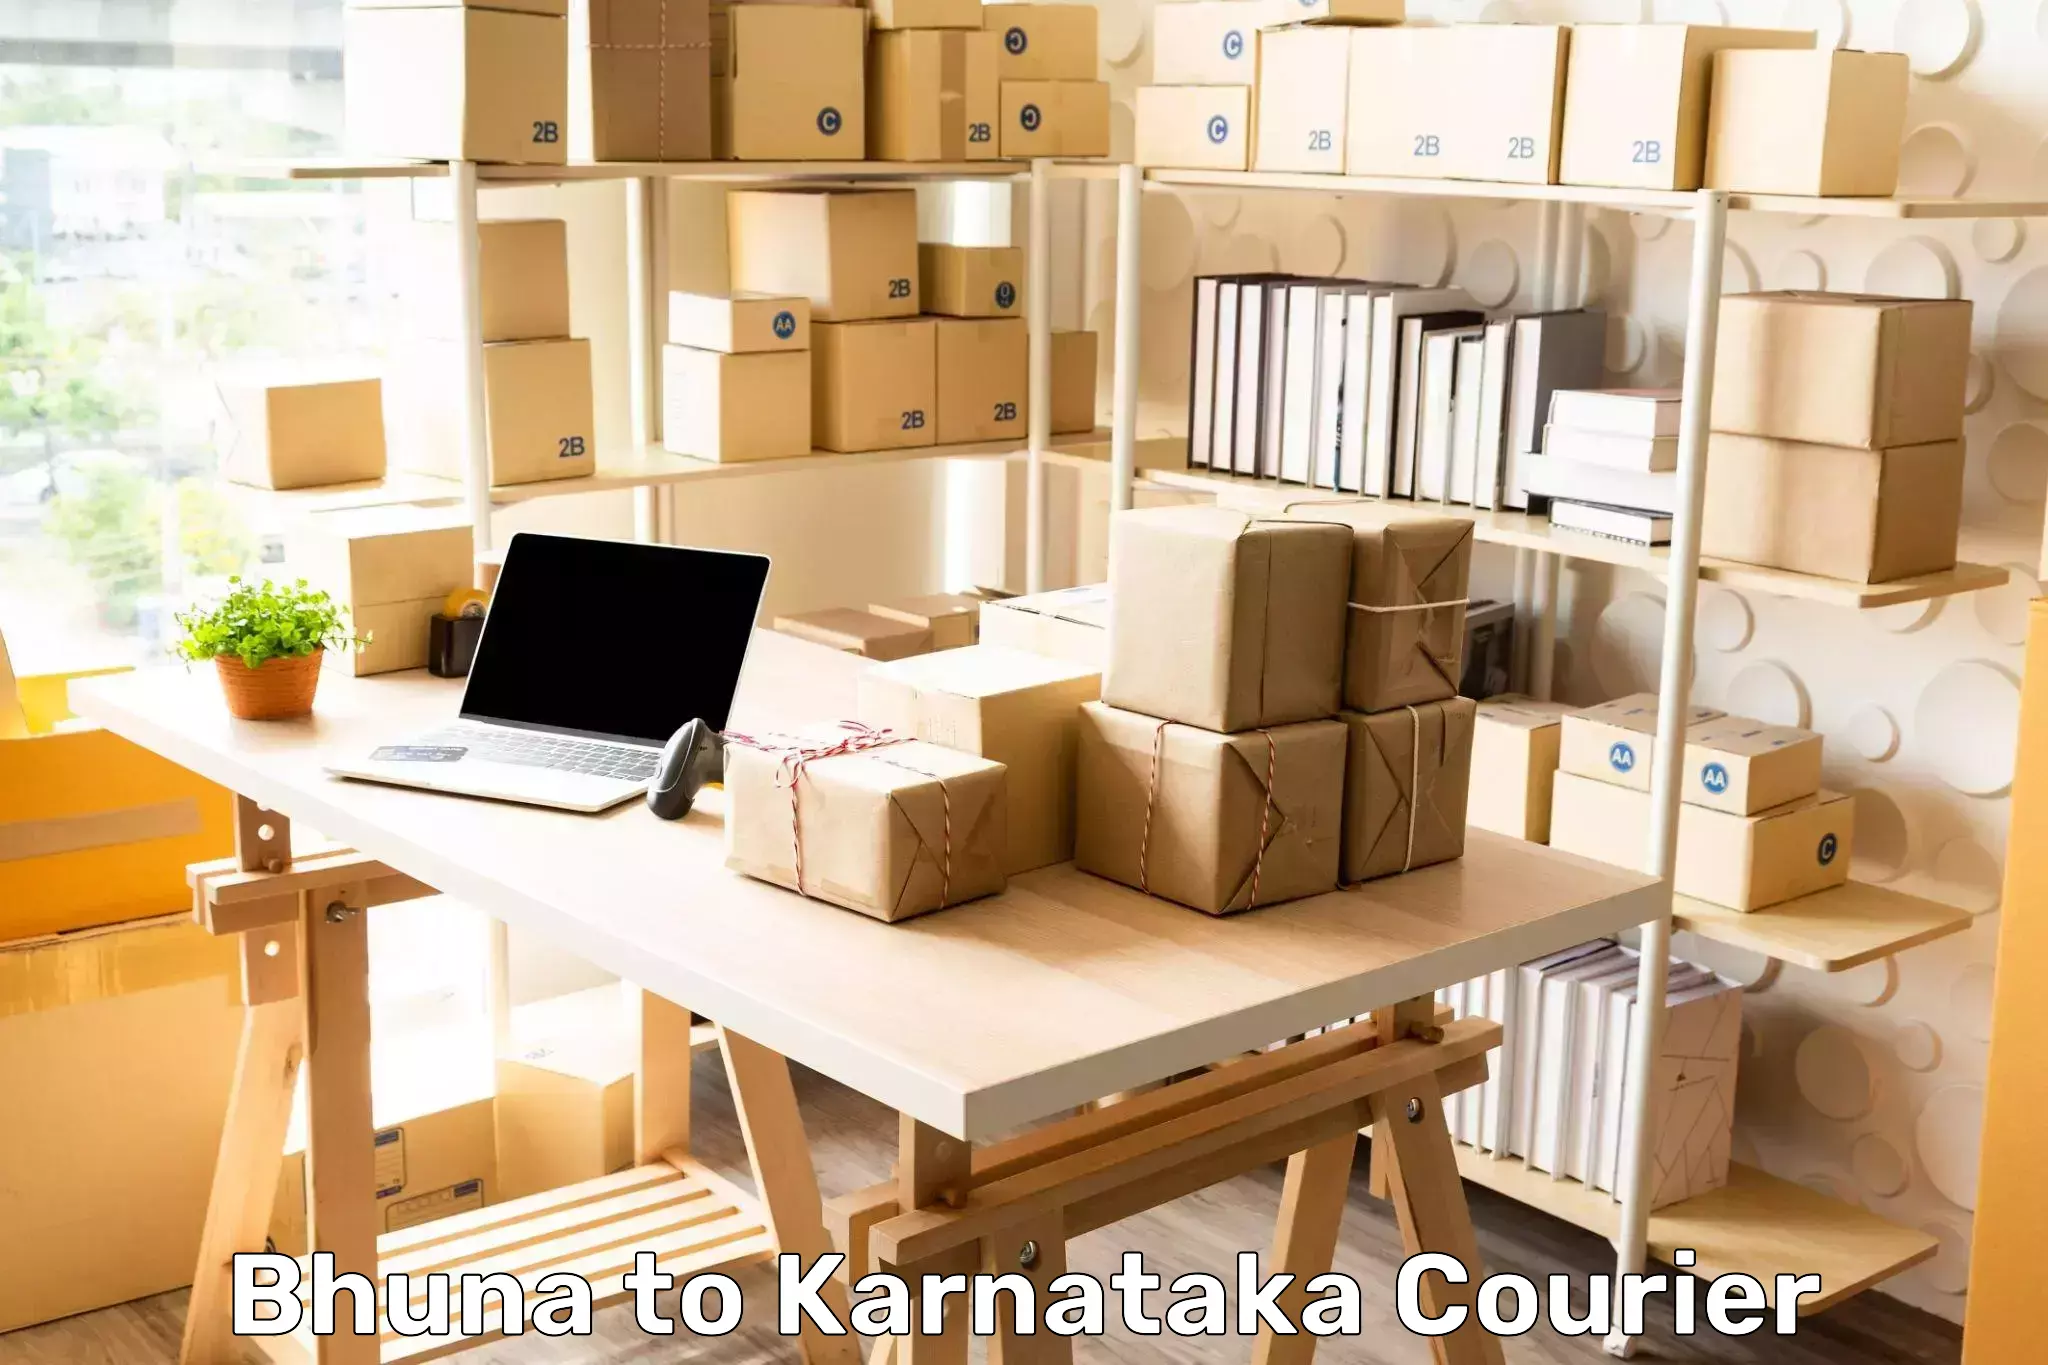 Global shipping solutions Bhuna to Dharwad